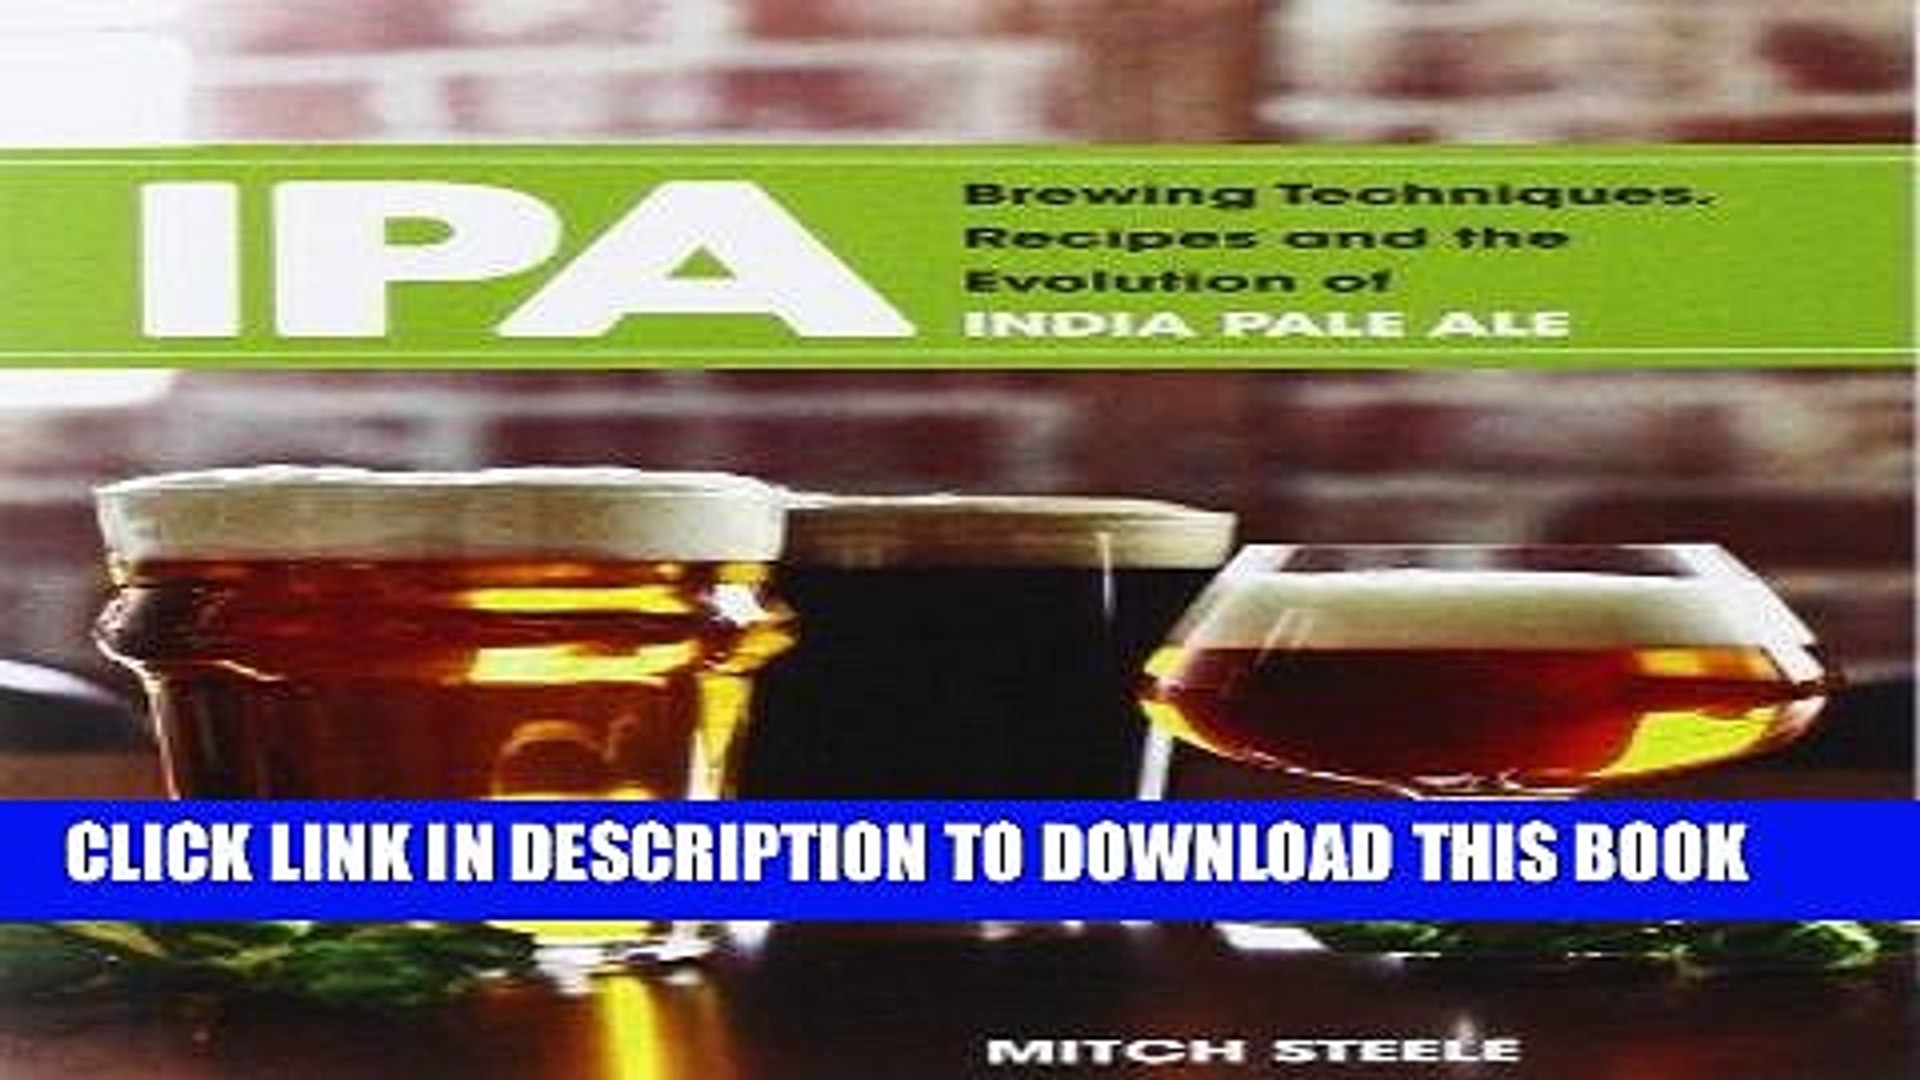 [Free Read] IPA: Brewing Techniques, Recipes and the Evolution of India Pale Ale Free Online